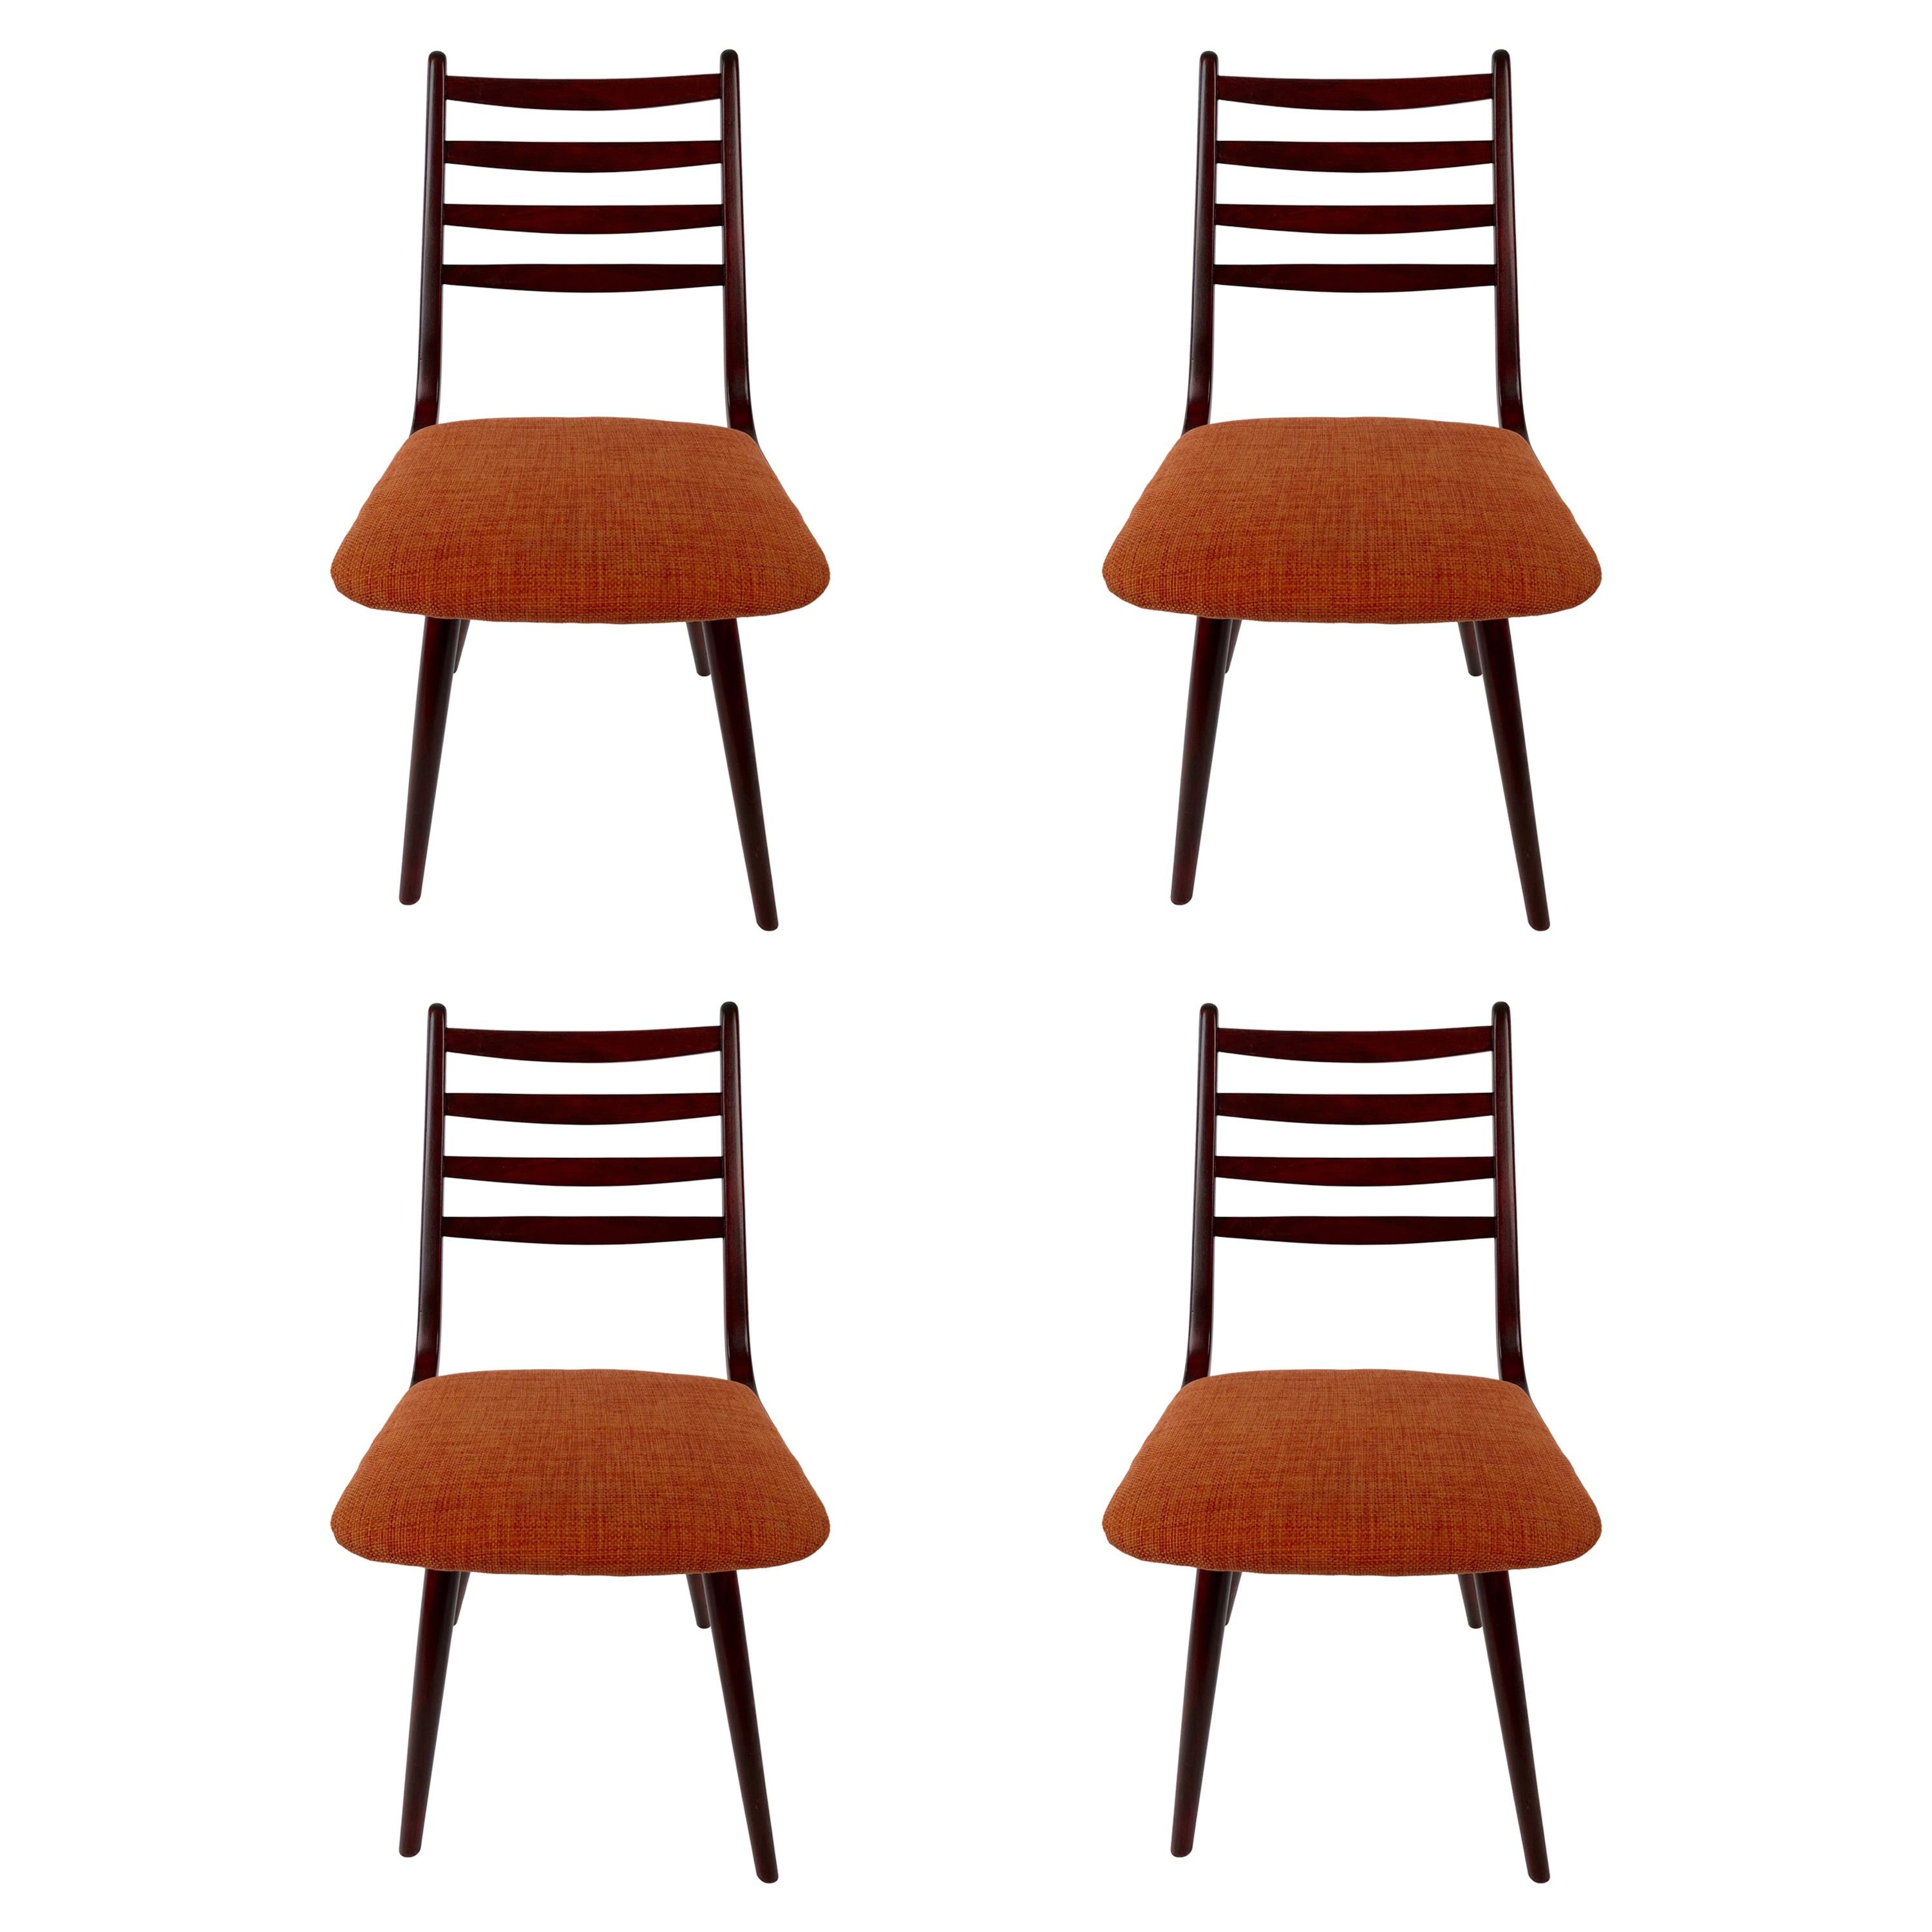 Set of 4 Dinning Chairs, 1970's, Thonet Factory